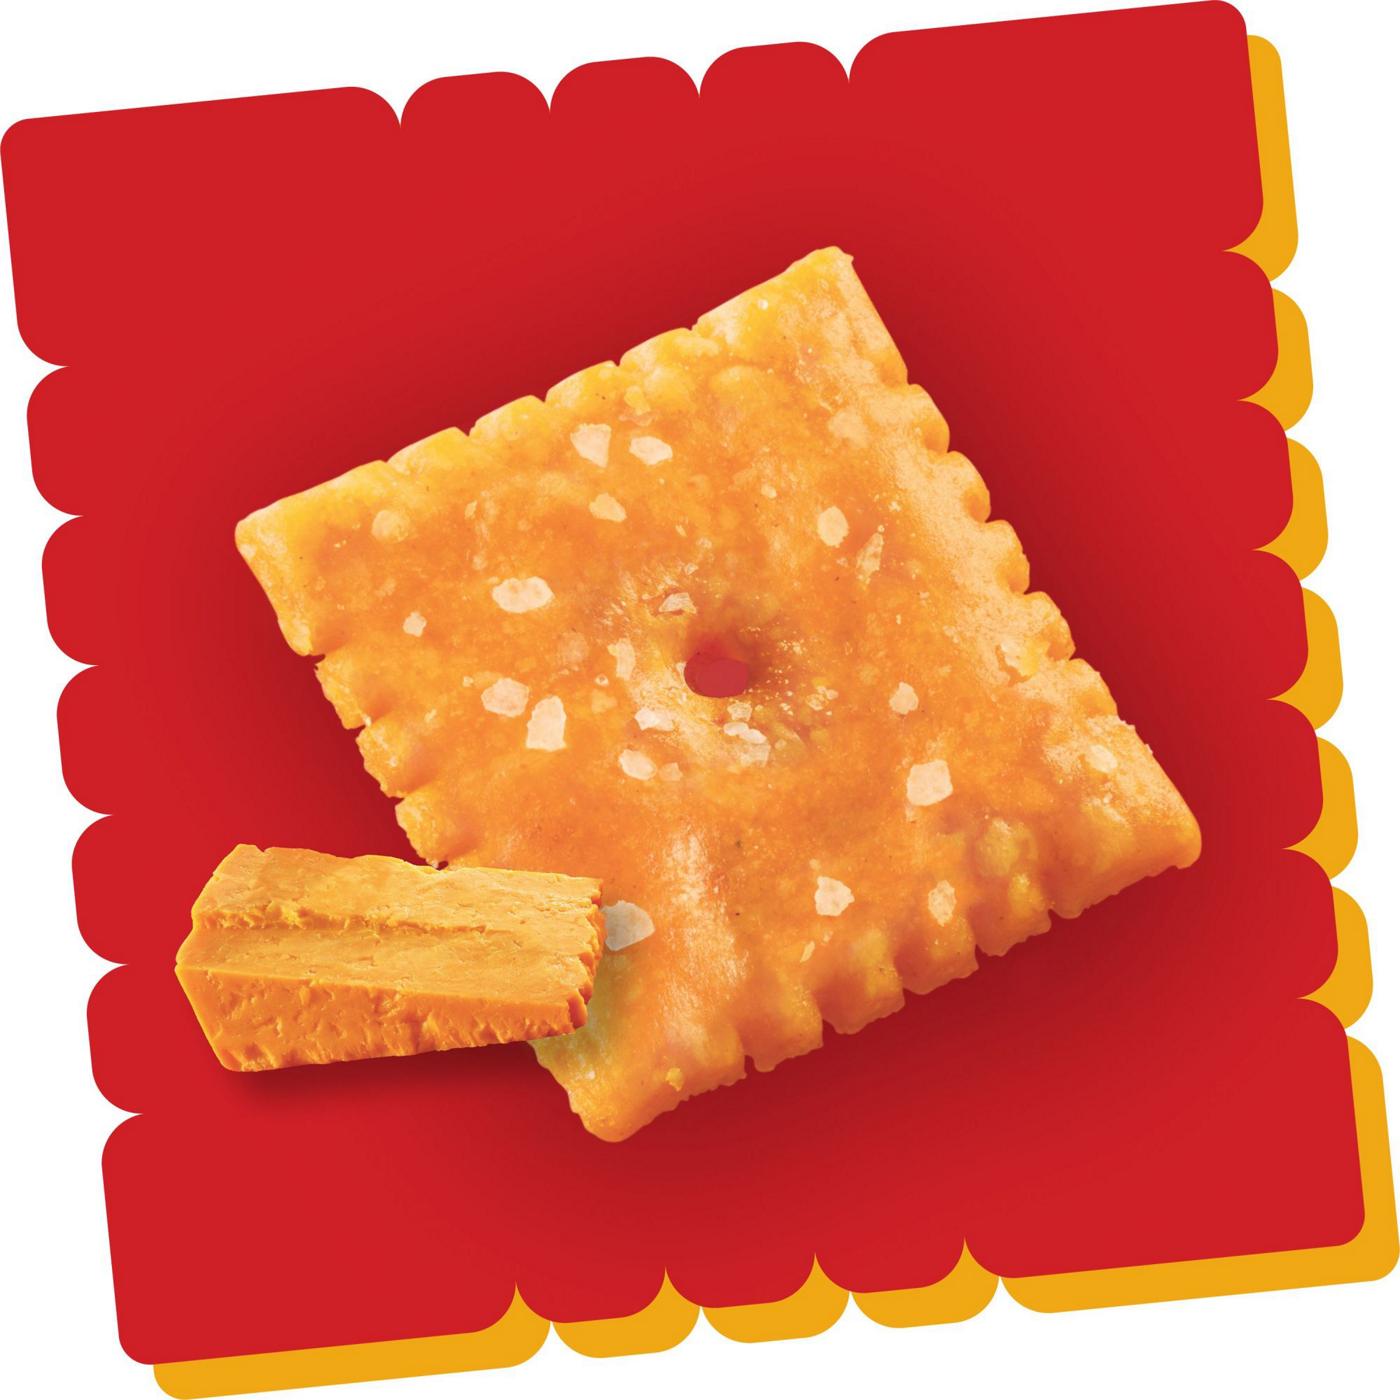 Cheez-It Original Cheese Crackers; image 5 of 5